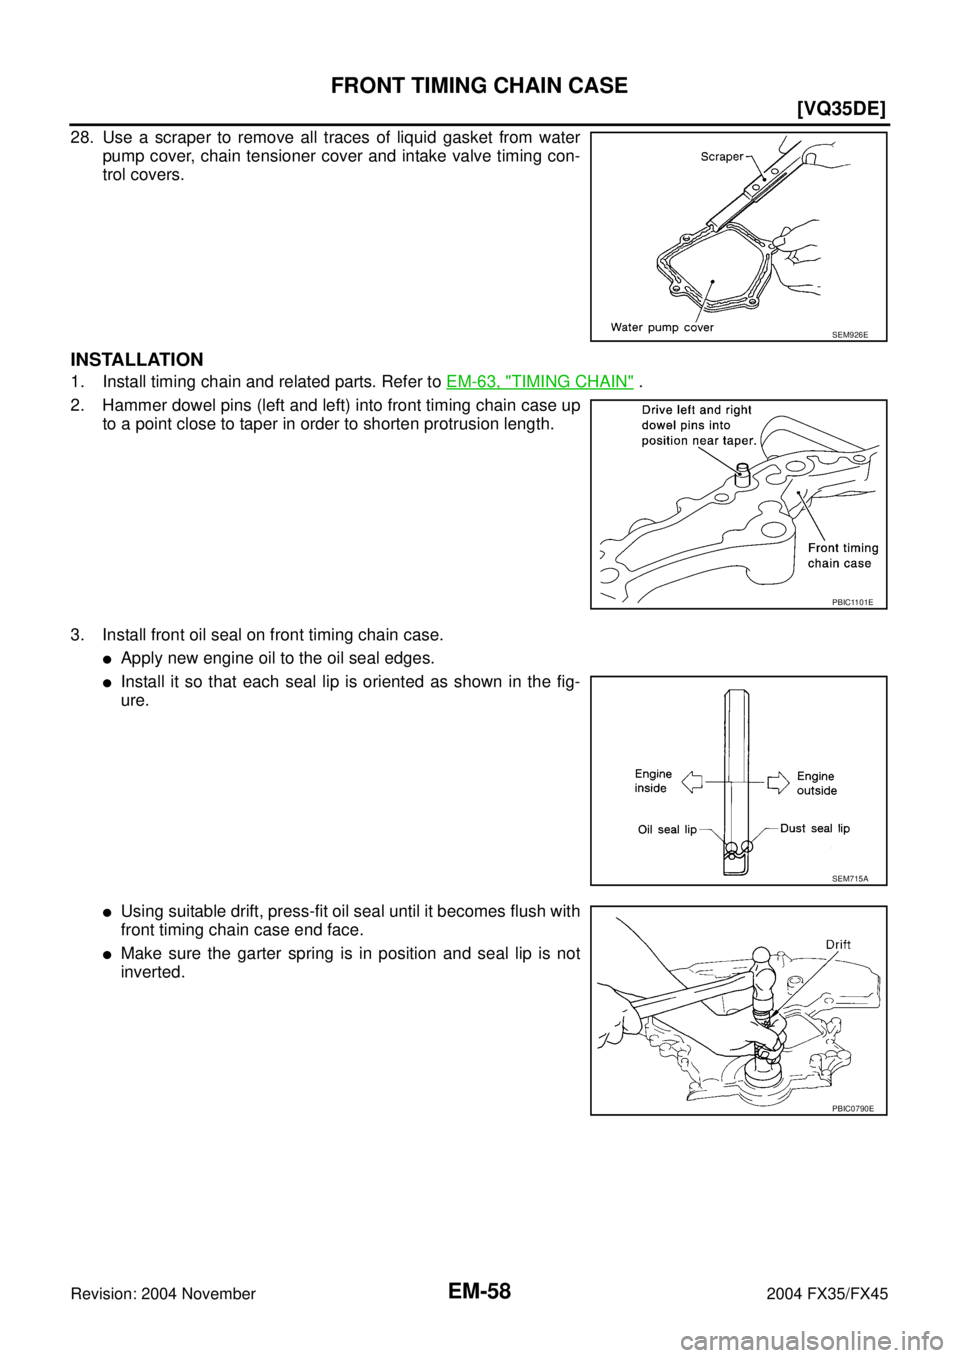 INFINITI FX35 2004  Service Manual EM-58
[VQ35DE]
FRONT TIMING CHAIN CASE
Revision: 2004 November 2004 FX35/FX45
28. Use a scraper to remove all traces of liquid gasket from water
pump cover, chain tensioner cover and intake valve timi